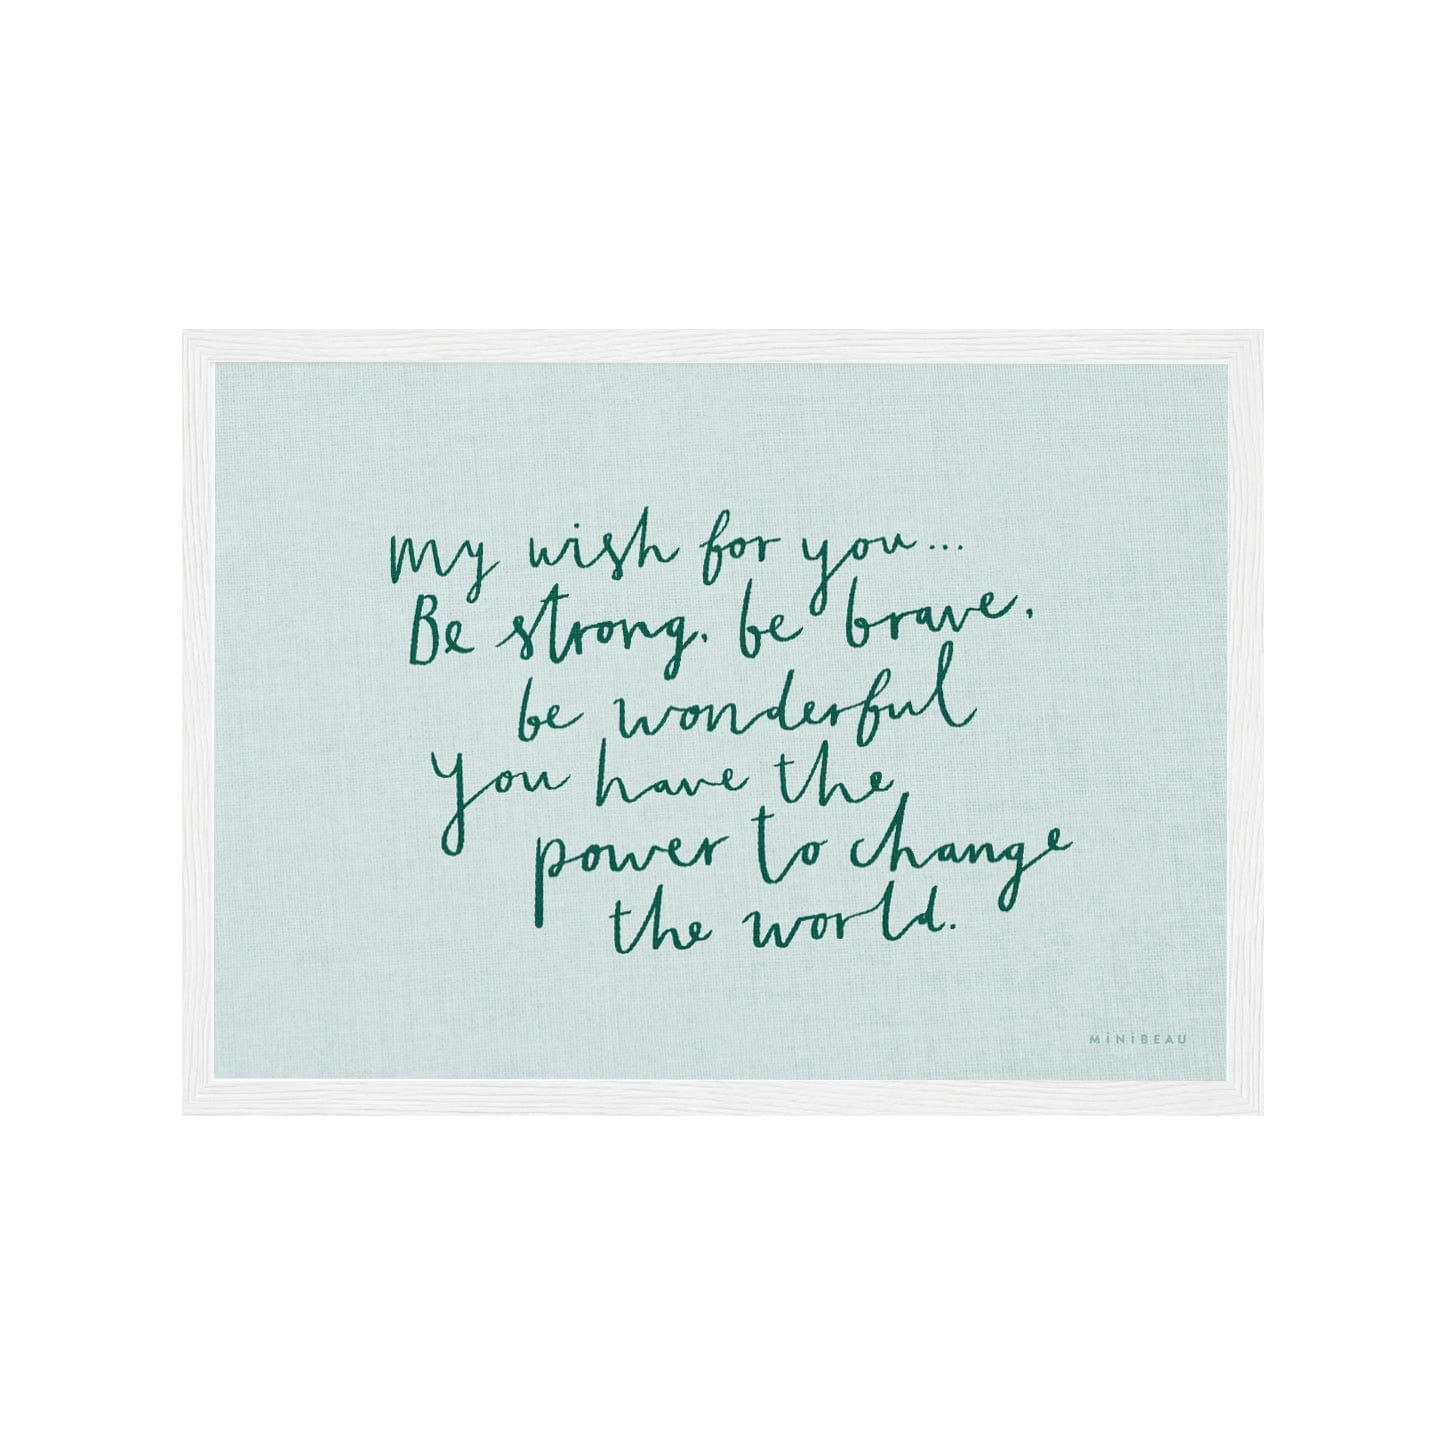 Art print in white frame. Our My Wish for you art print in hand-written typography in green says MY WISH FOR YOU BE STRONG, BE BRAVE, BE WONDERFUL. YOU HAVE THE POWER TO CHANGE THE WORLD, on a light blue background.